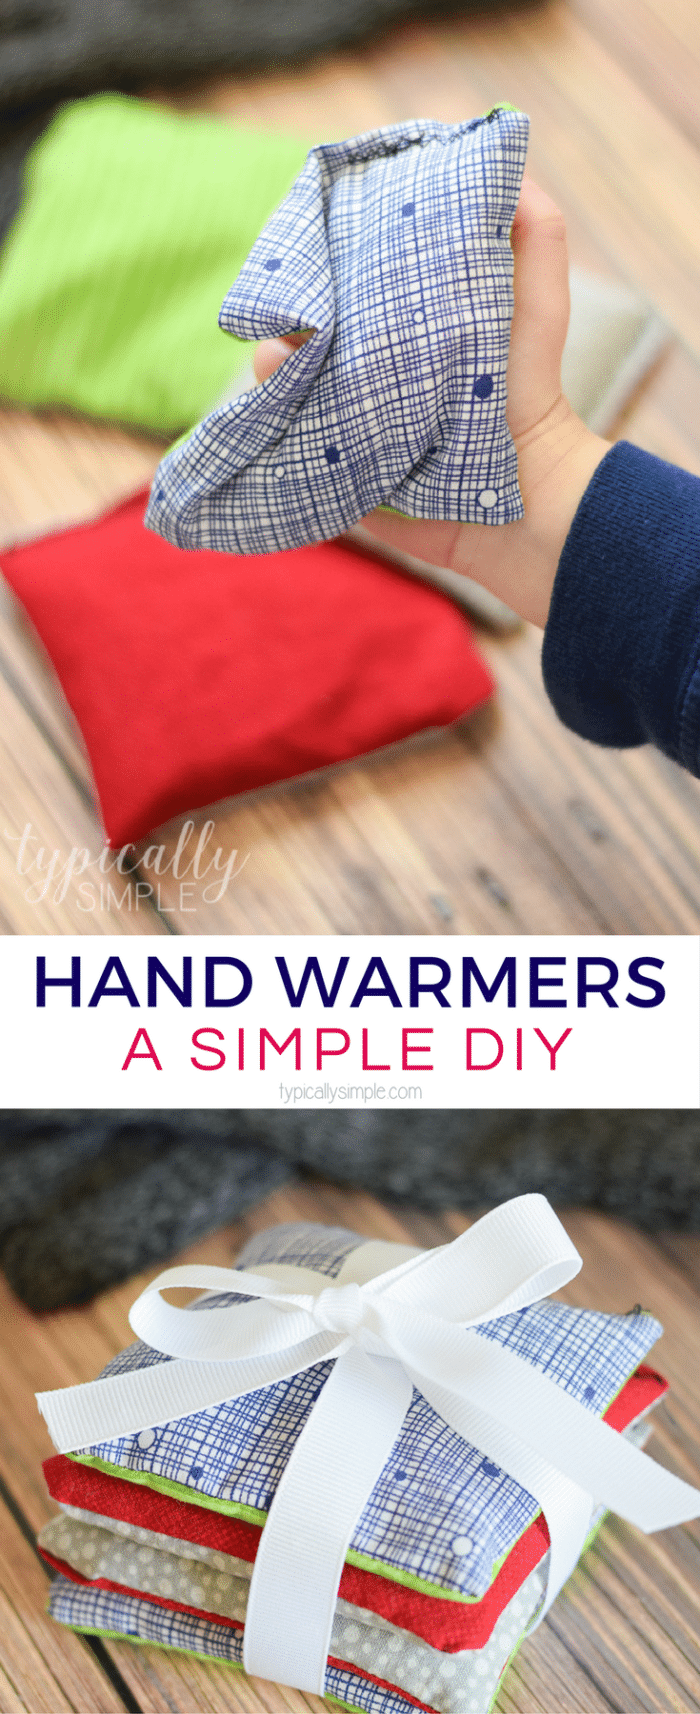 These DIY rice hand warmers are a great way to use up some fabric scraps! Plus it’s the perfect beginner’s sewing project for kids or adults! #sewingprojects #handmadegifts